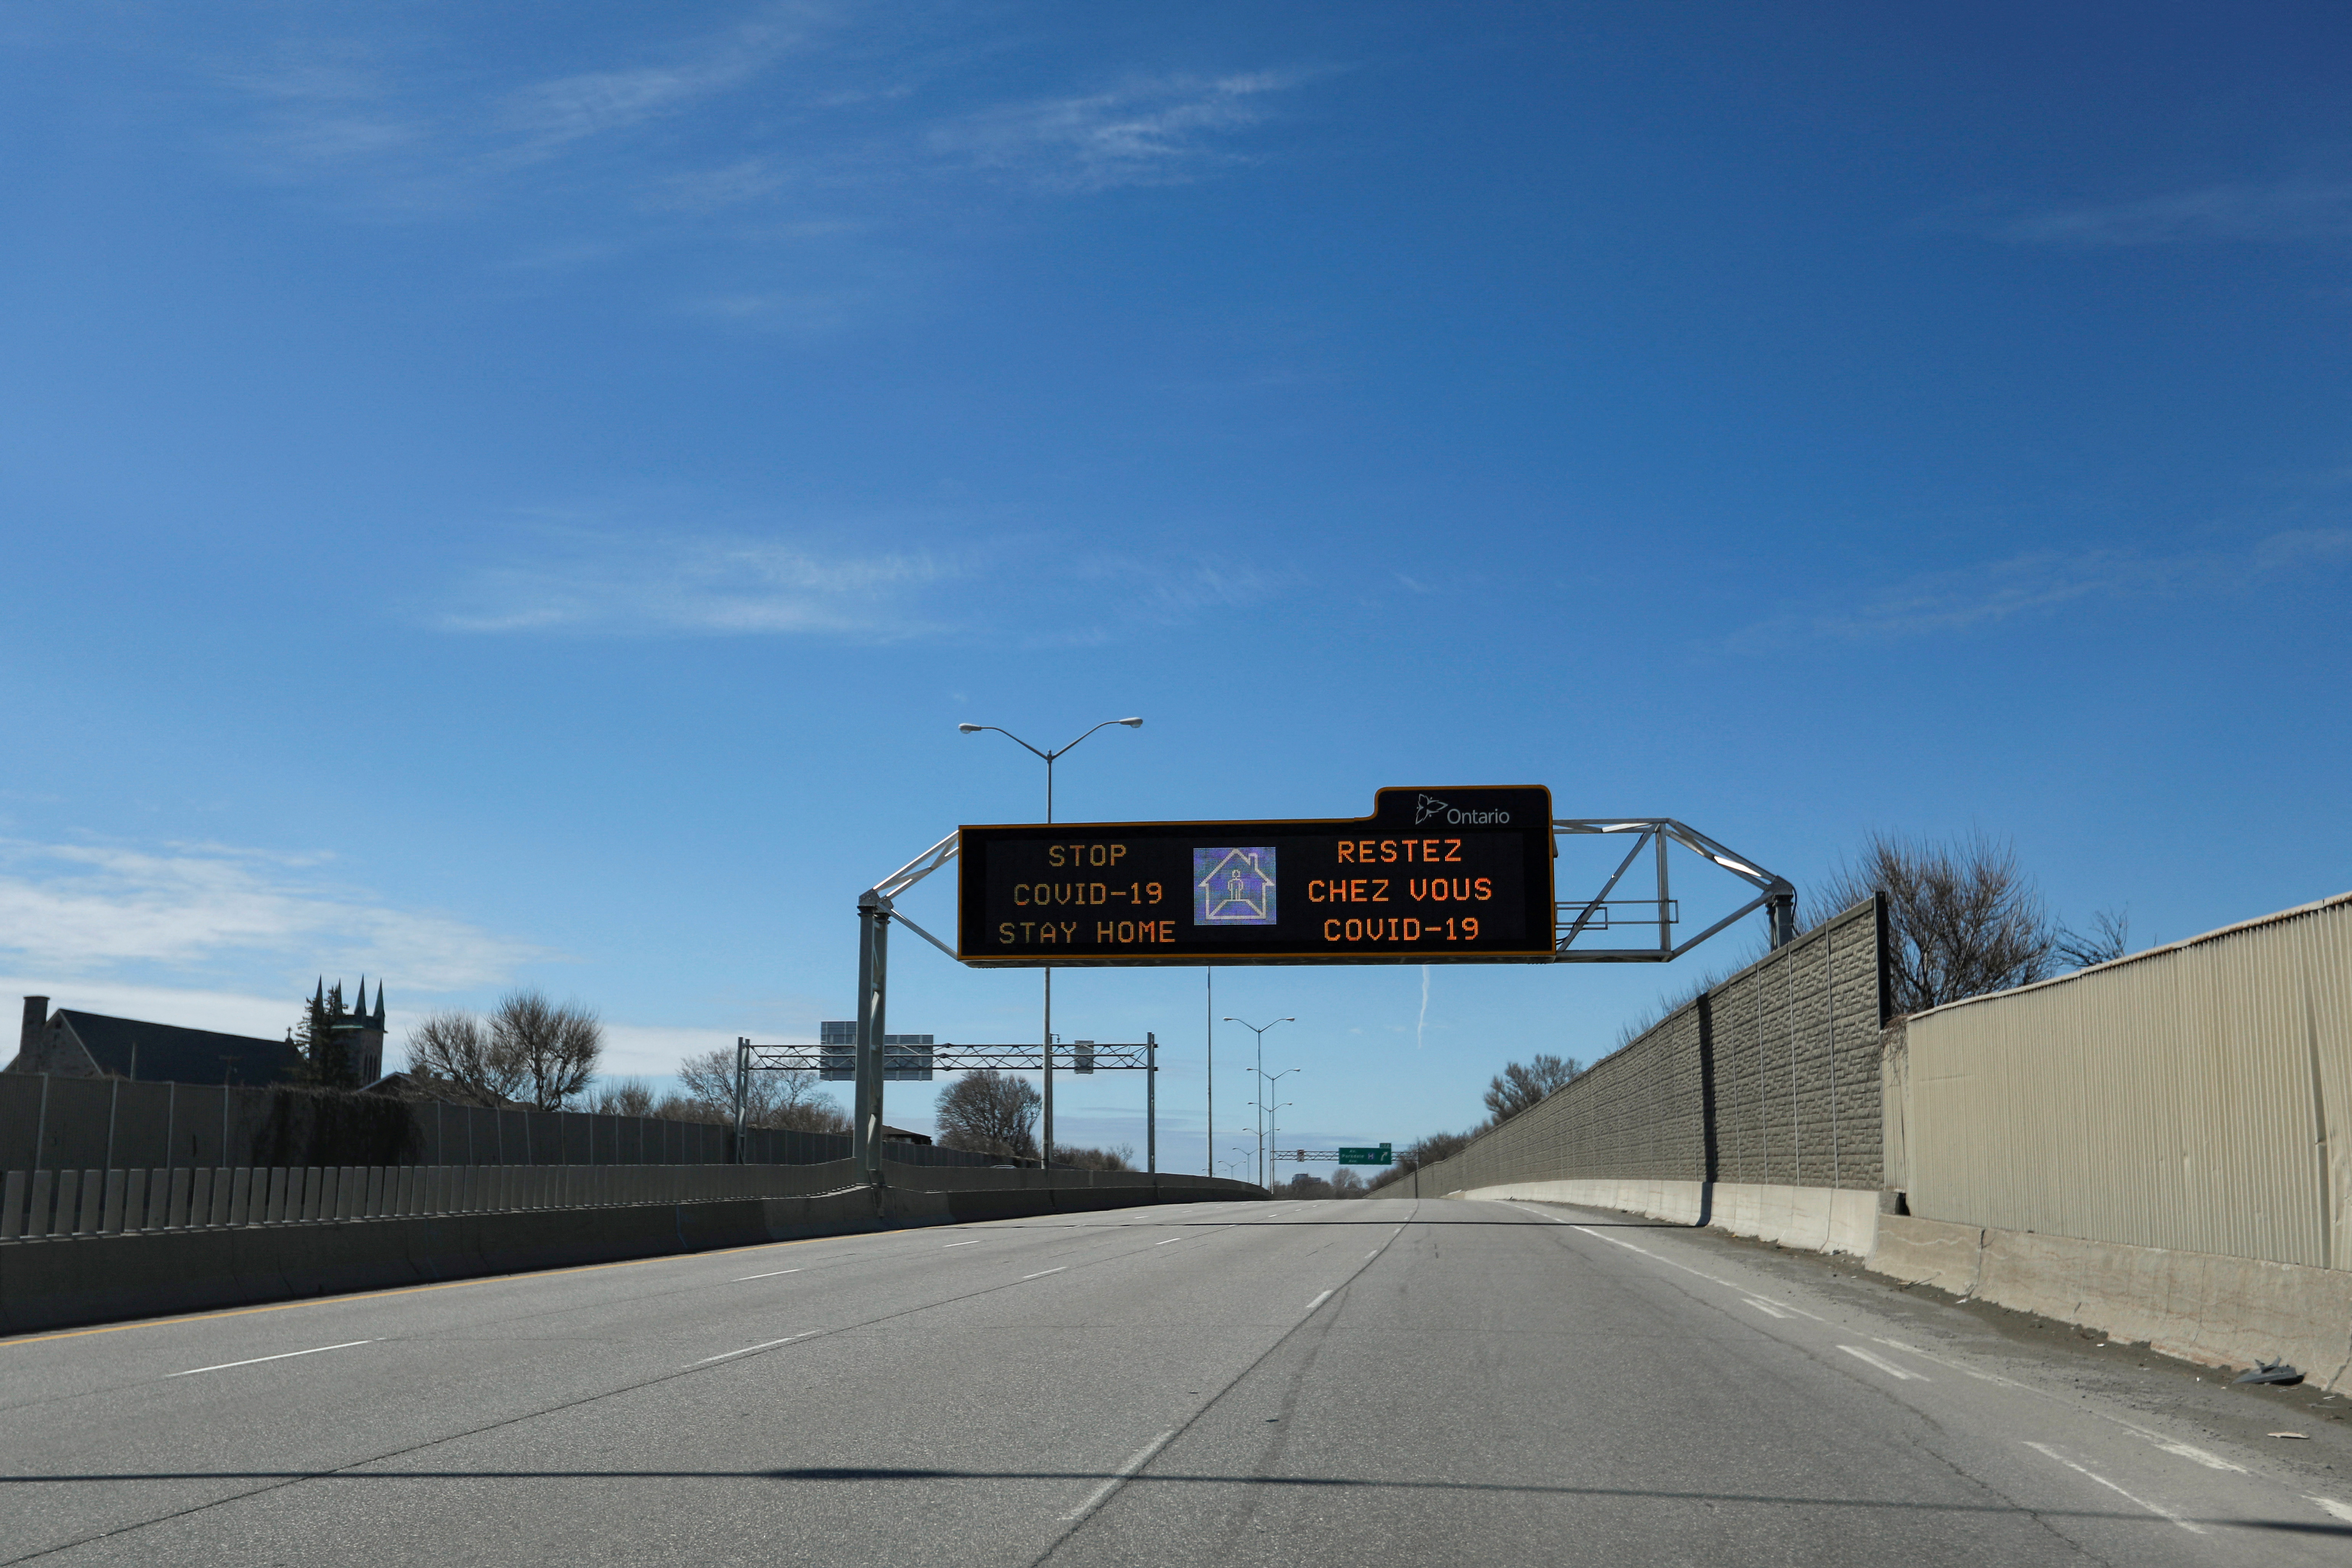 A digital traffic sign is seen above an empty highway 417, in Ottawa, Ontario